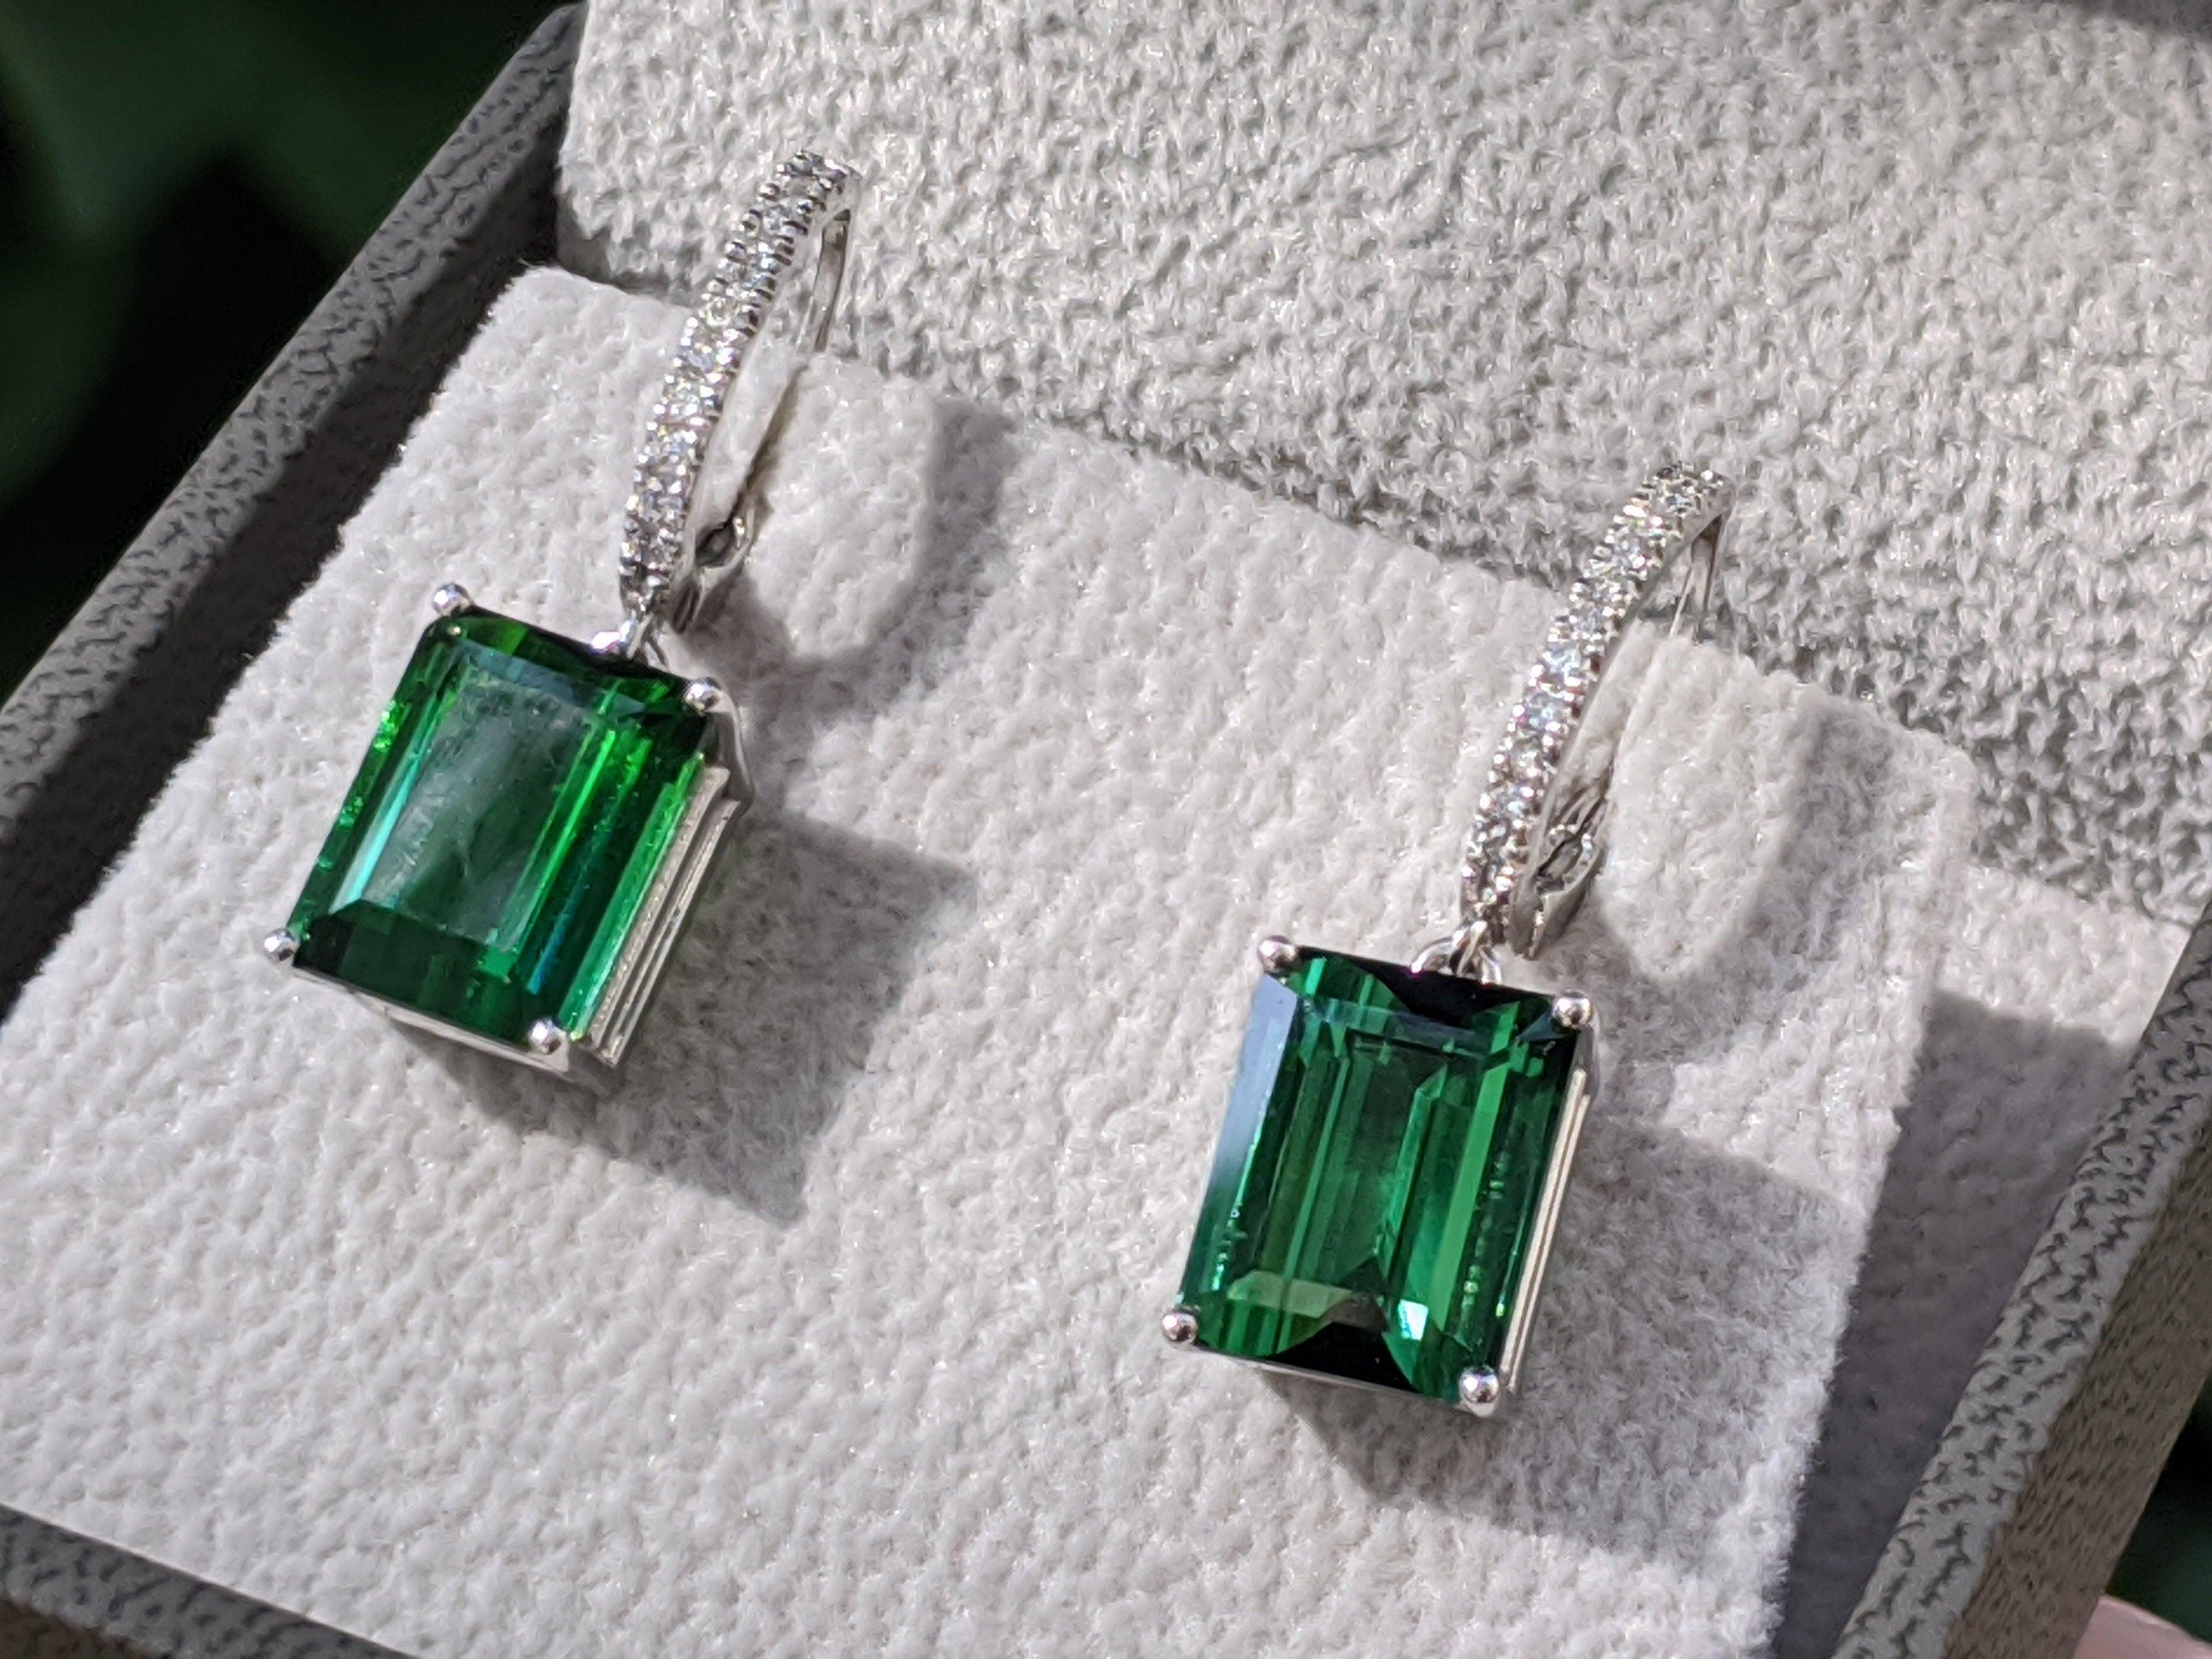 8 Carat Tourmaline and Diamond Earrings, Green Emerald Cut Tourmaline Dangle Earrings, Hairloom Earrings, Rare Find One Of a Kind Earrings
 
 Center Stone:
 Carat Weight: 4ct Natural Tourmaline Gem Quality
 Color: Forest Green
 Clarity: Eye Clean
 
